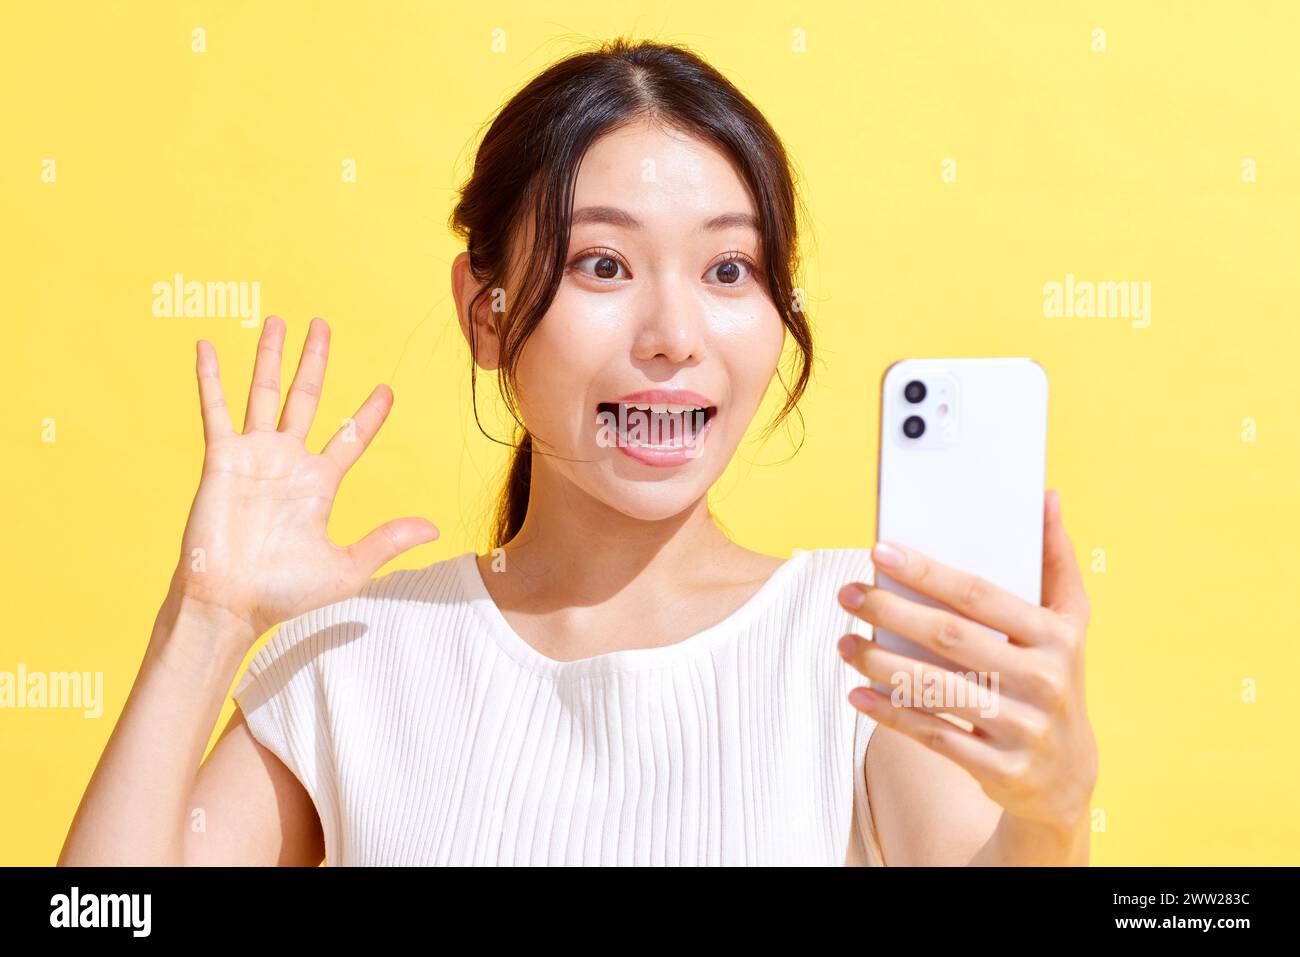 Asian woman taking selfie with smartphone Stock Photo